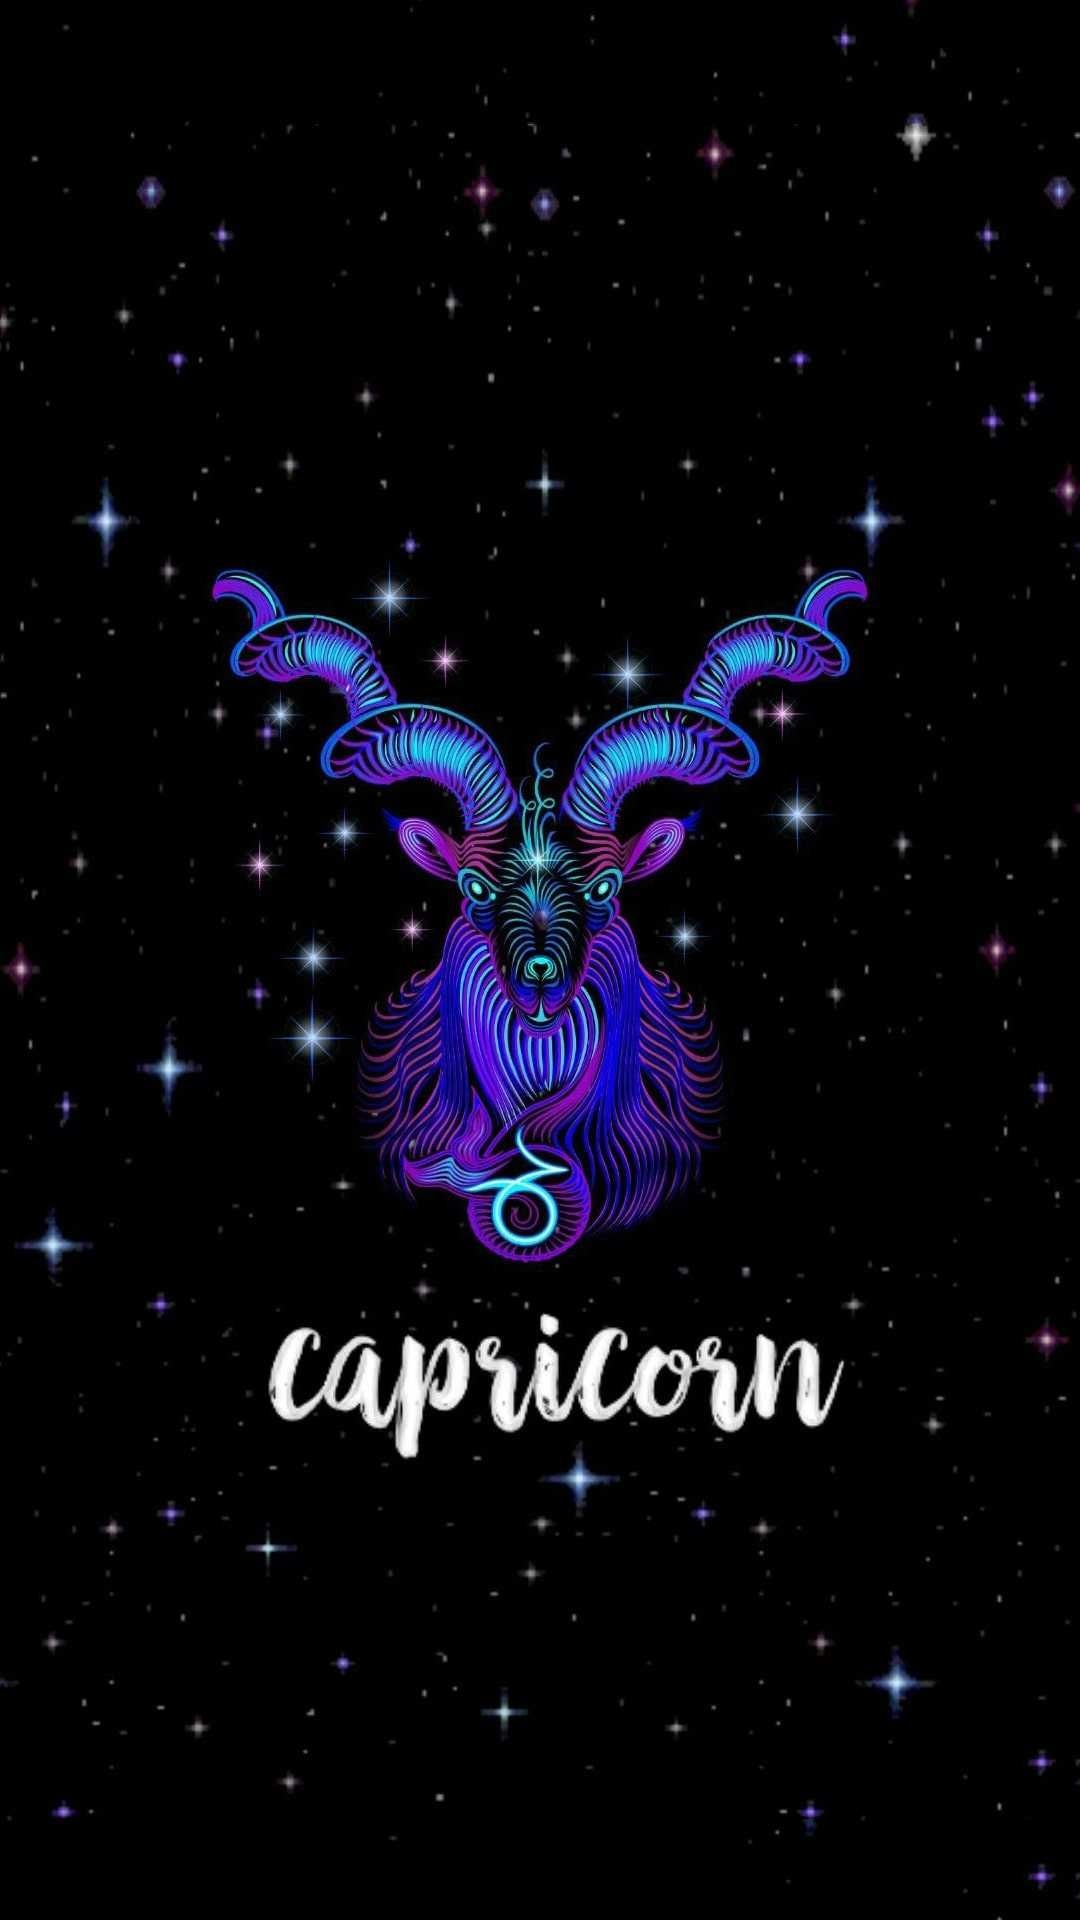 Capricorn wallpapers, Astrological sign artwork, Astrology fascination, 1080x1920 Full HD Handy